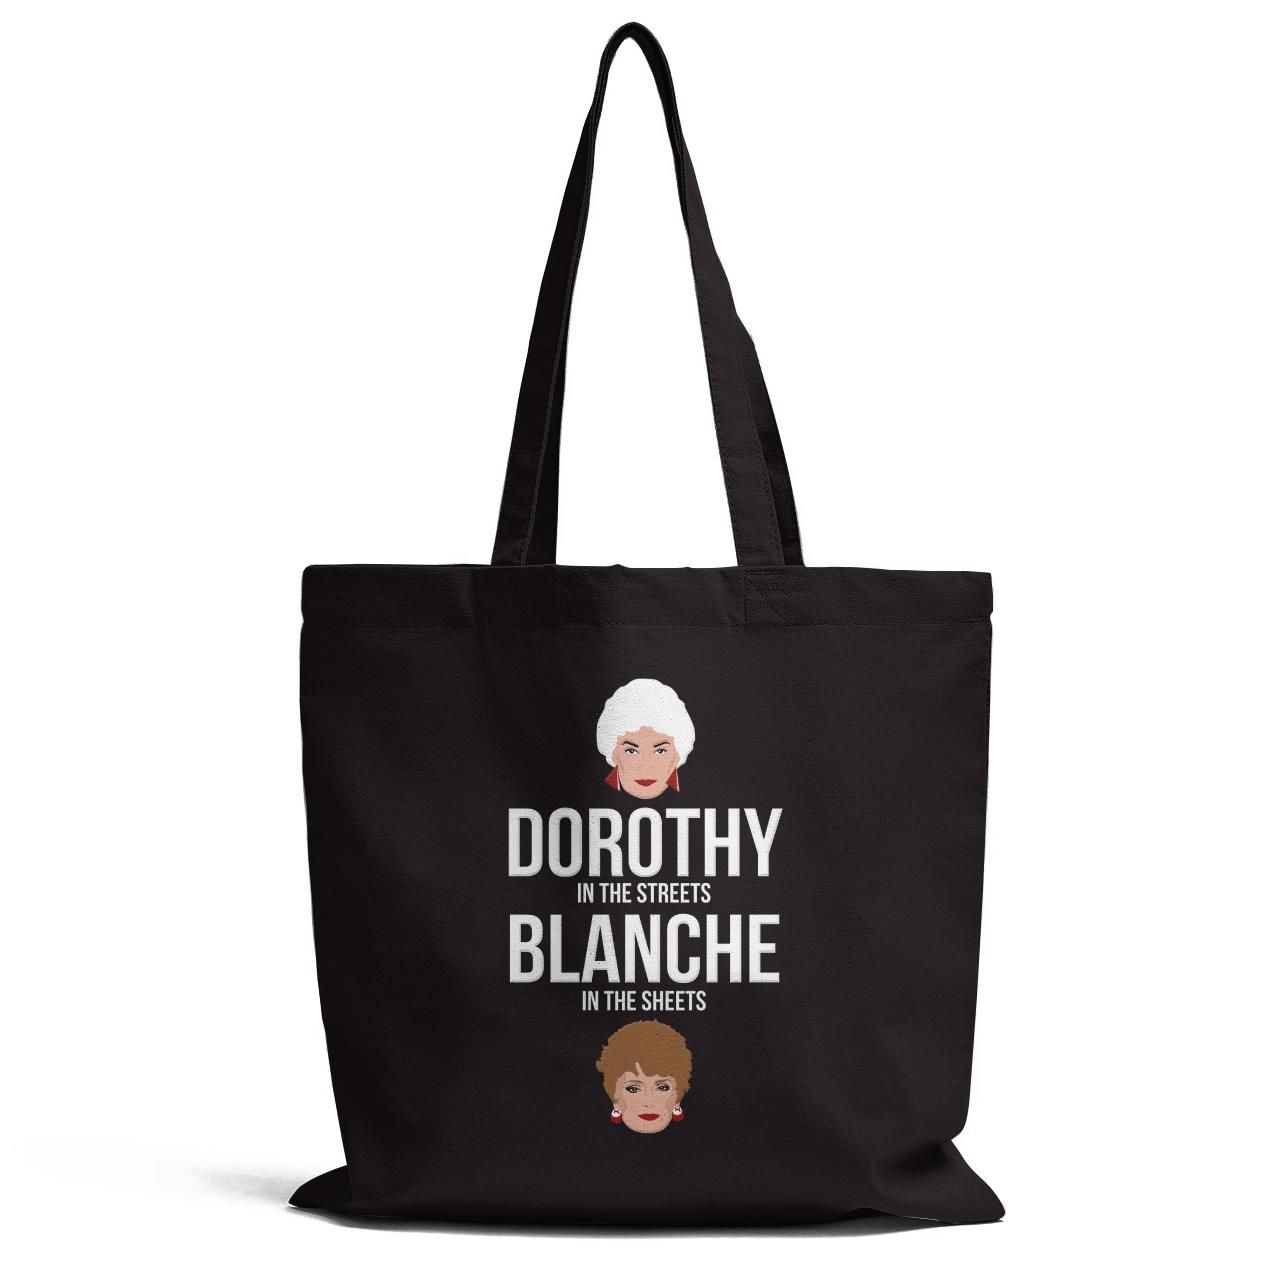 Dorothy In The Streets Blanche In The Sheets Tote Bag